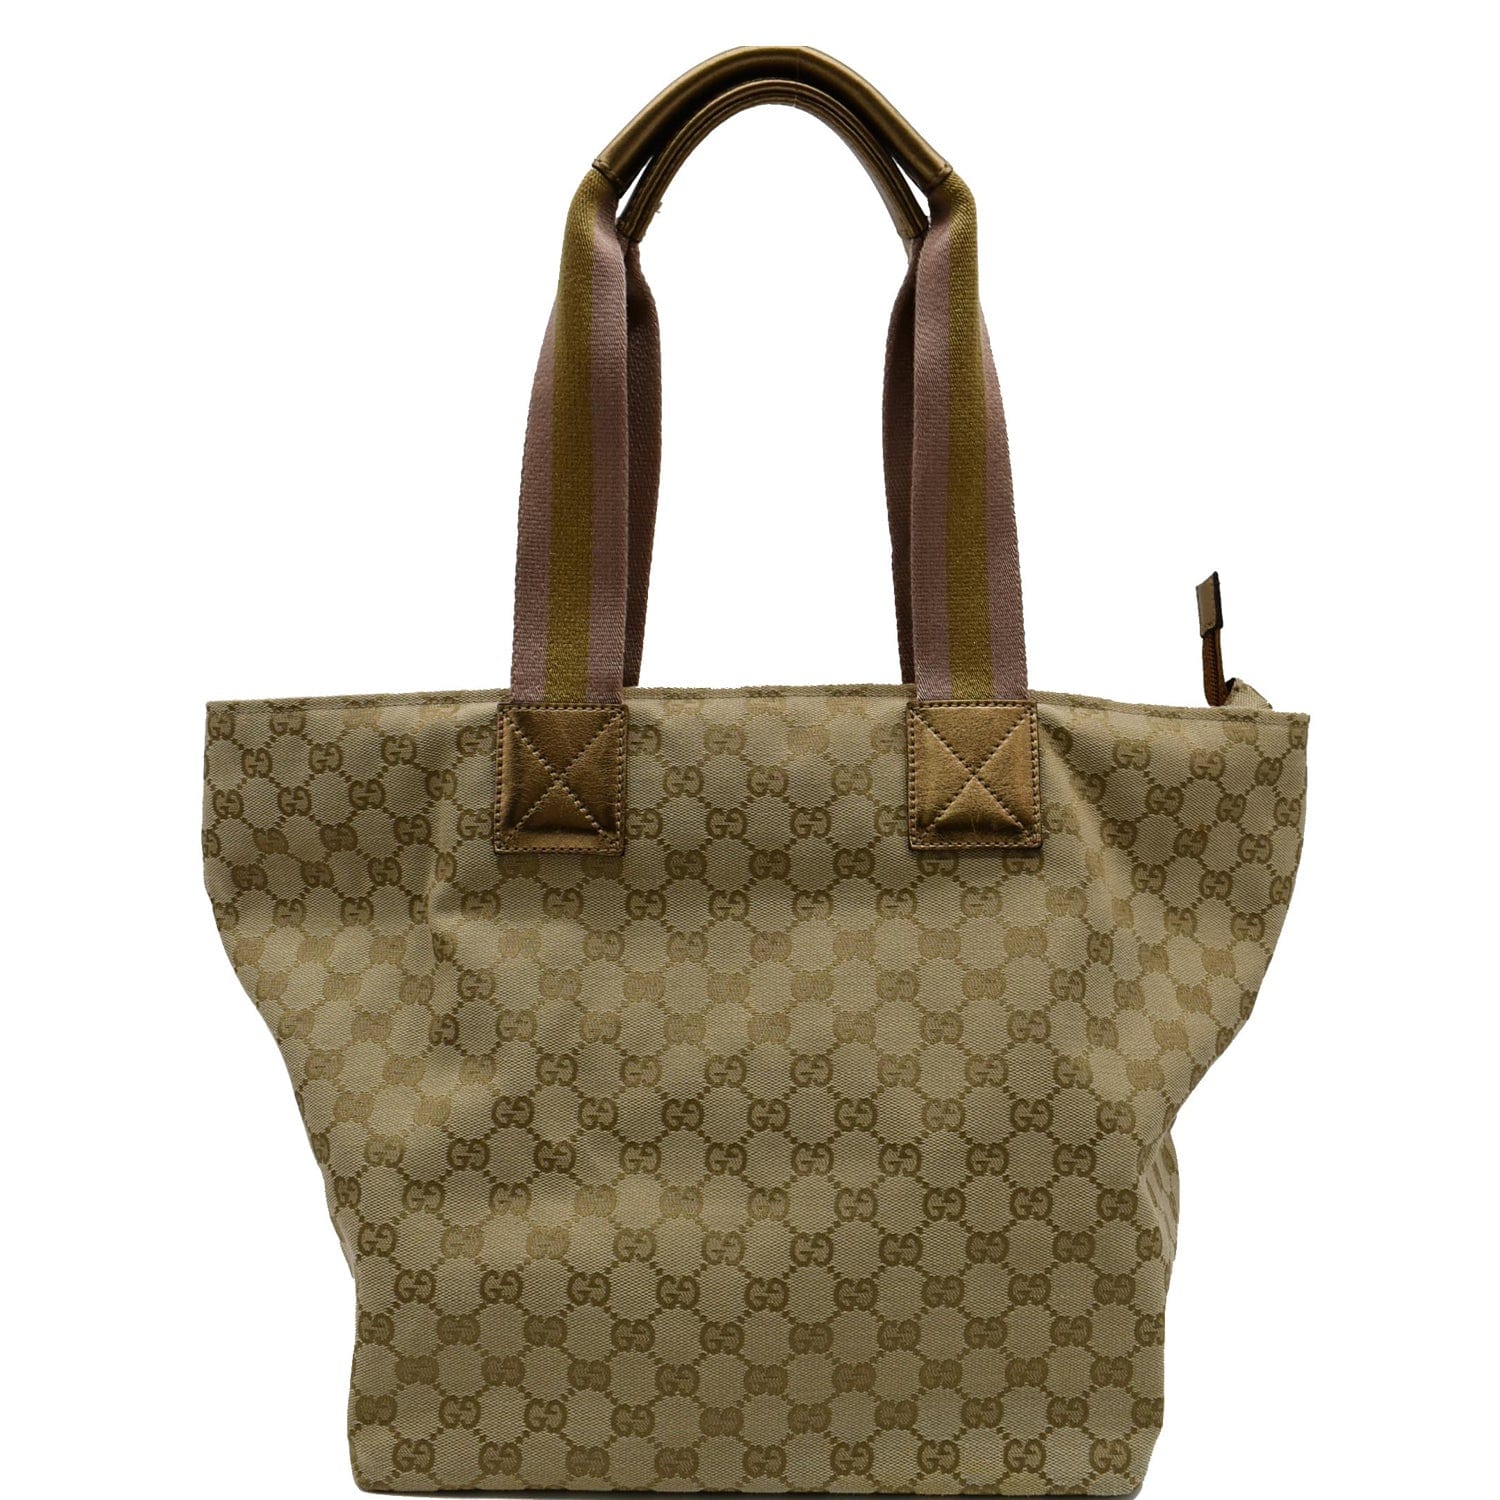 Gucci Pre-owned Women's Leather Tote Bag - Beige - One Size